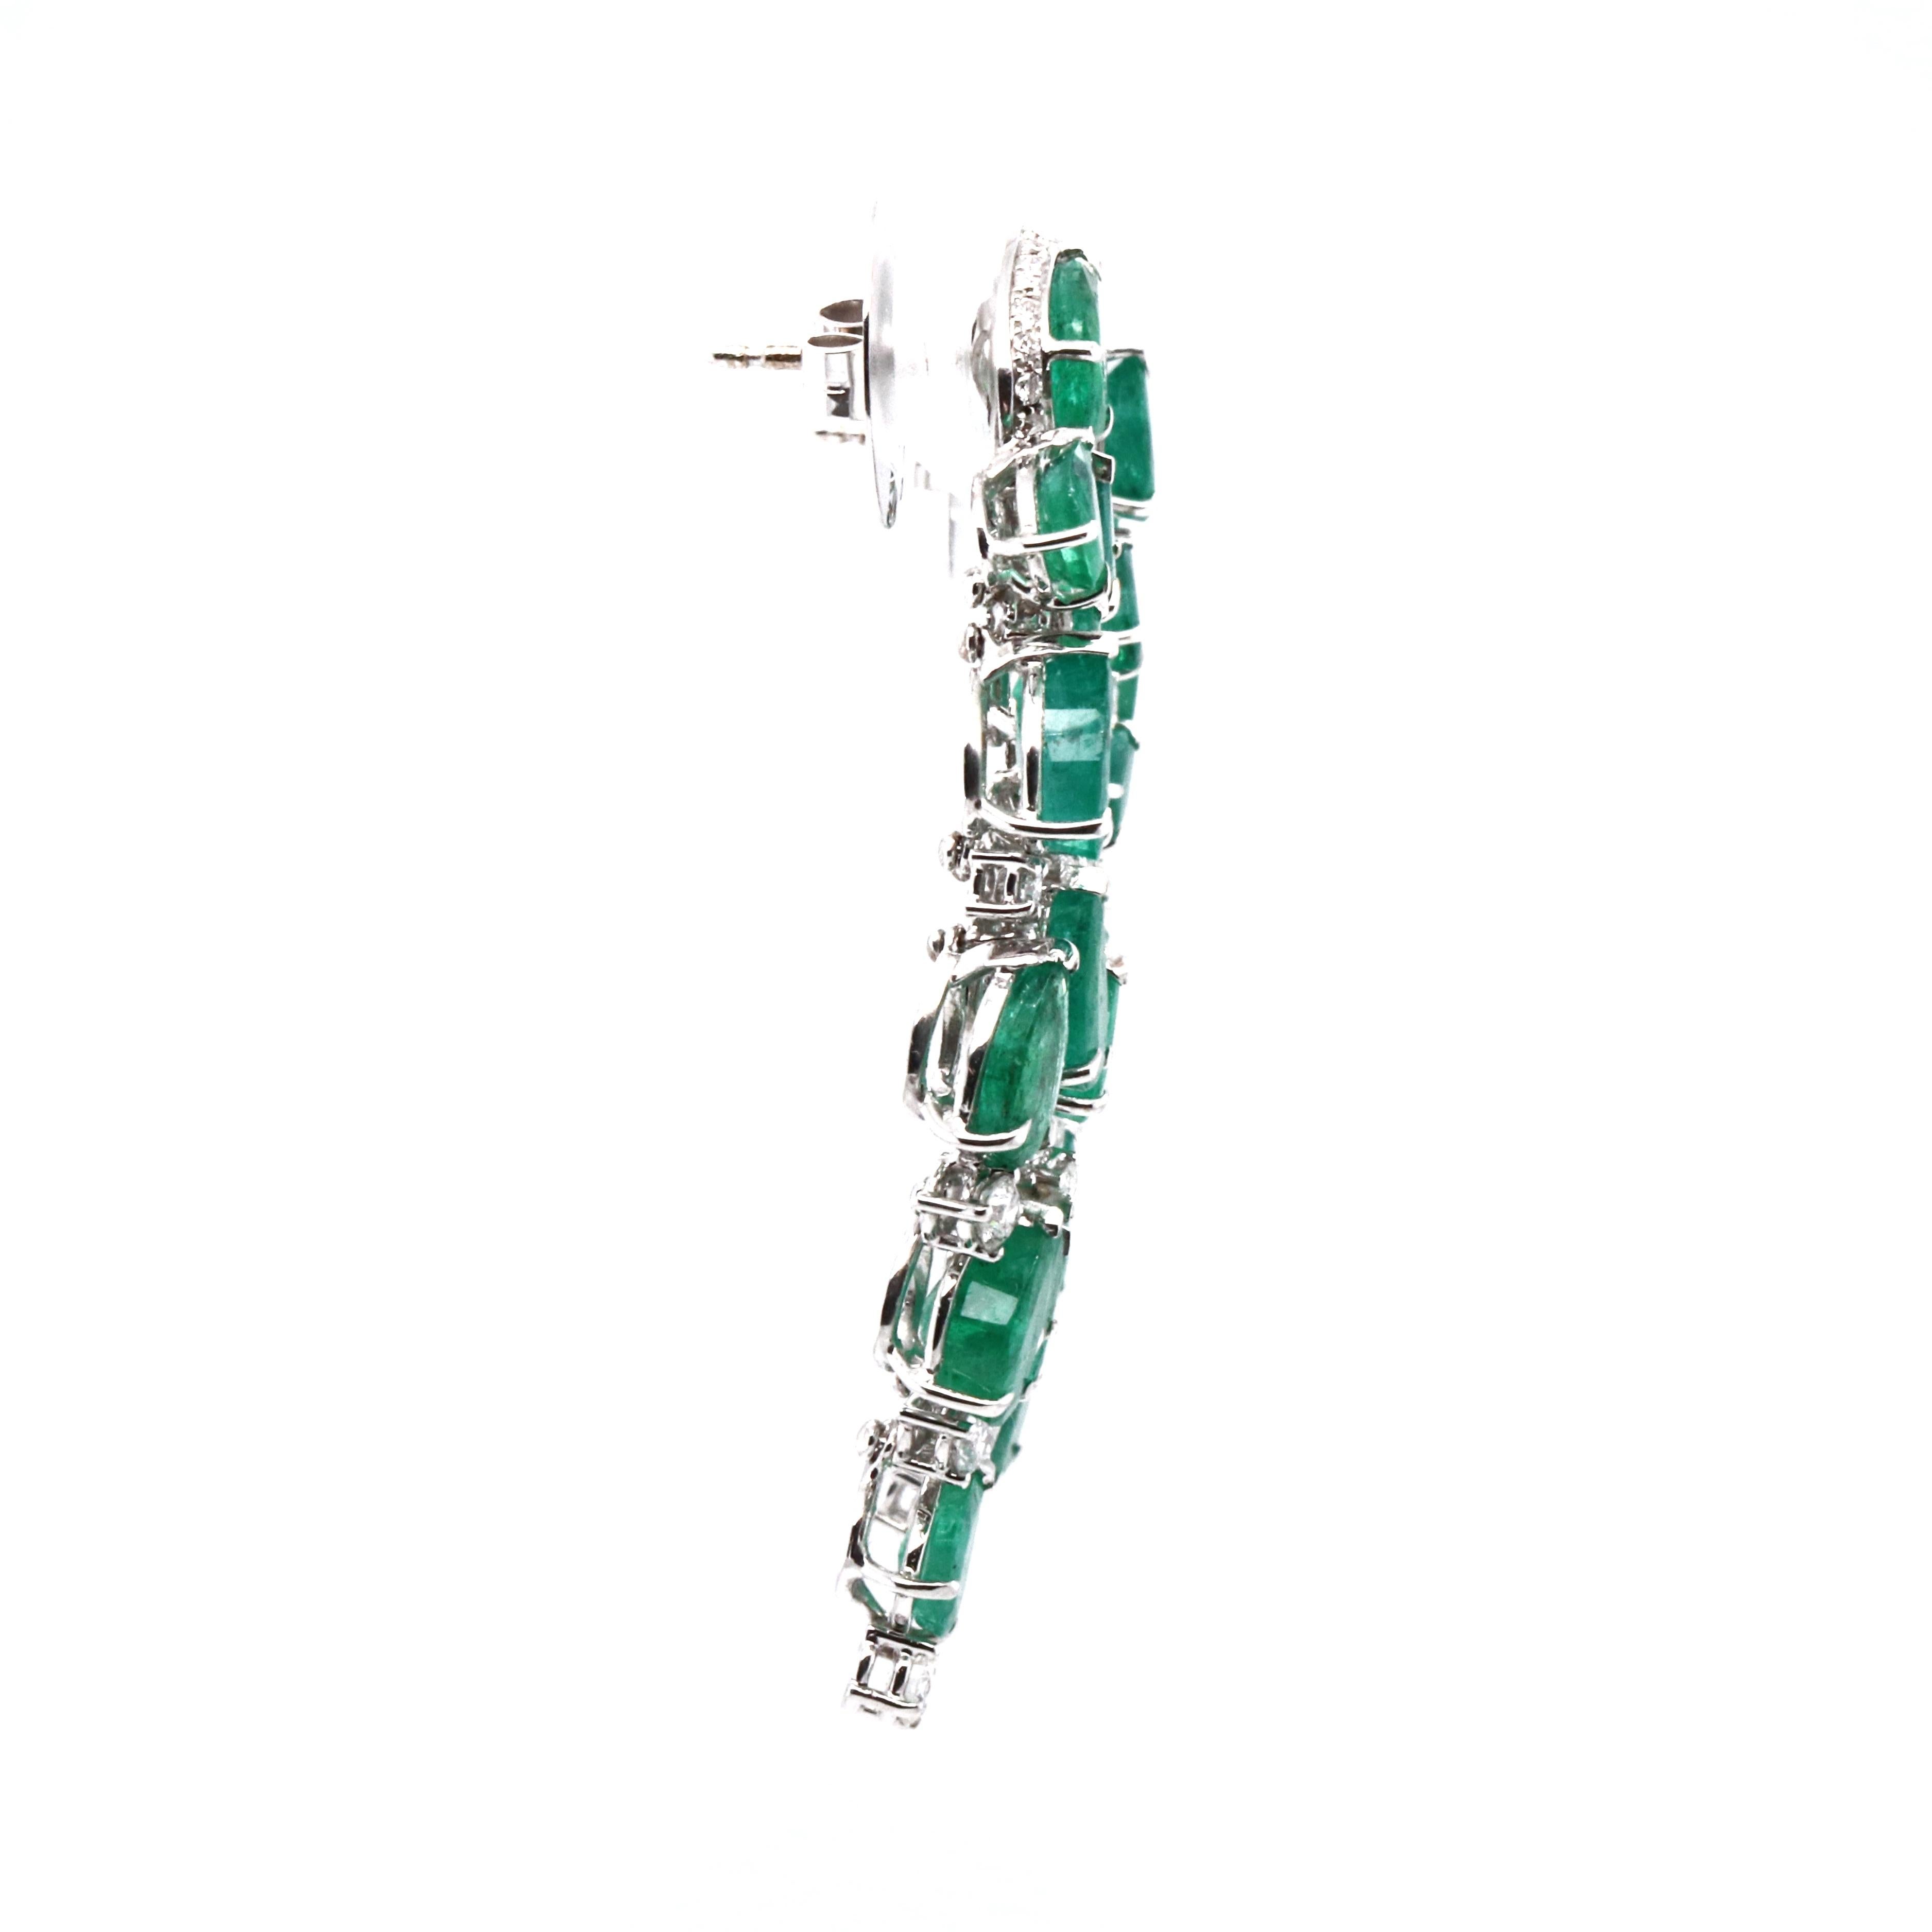 These 18K white gold stunning chandelier earrings are from our Divine collection. These chandelier earrings are created from natural white diamonds 2.52 Carat and beautiful pear shape natural emeralds in total of 17.13 Carat. They are 5 cm long.